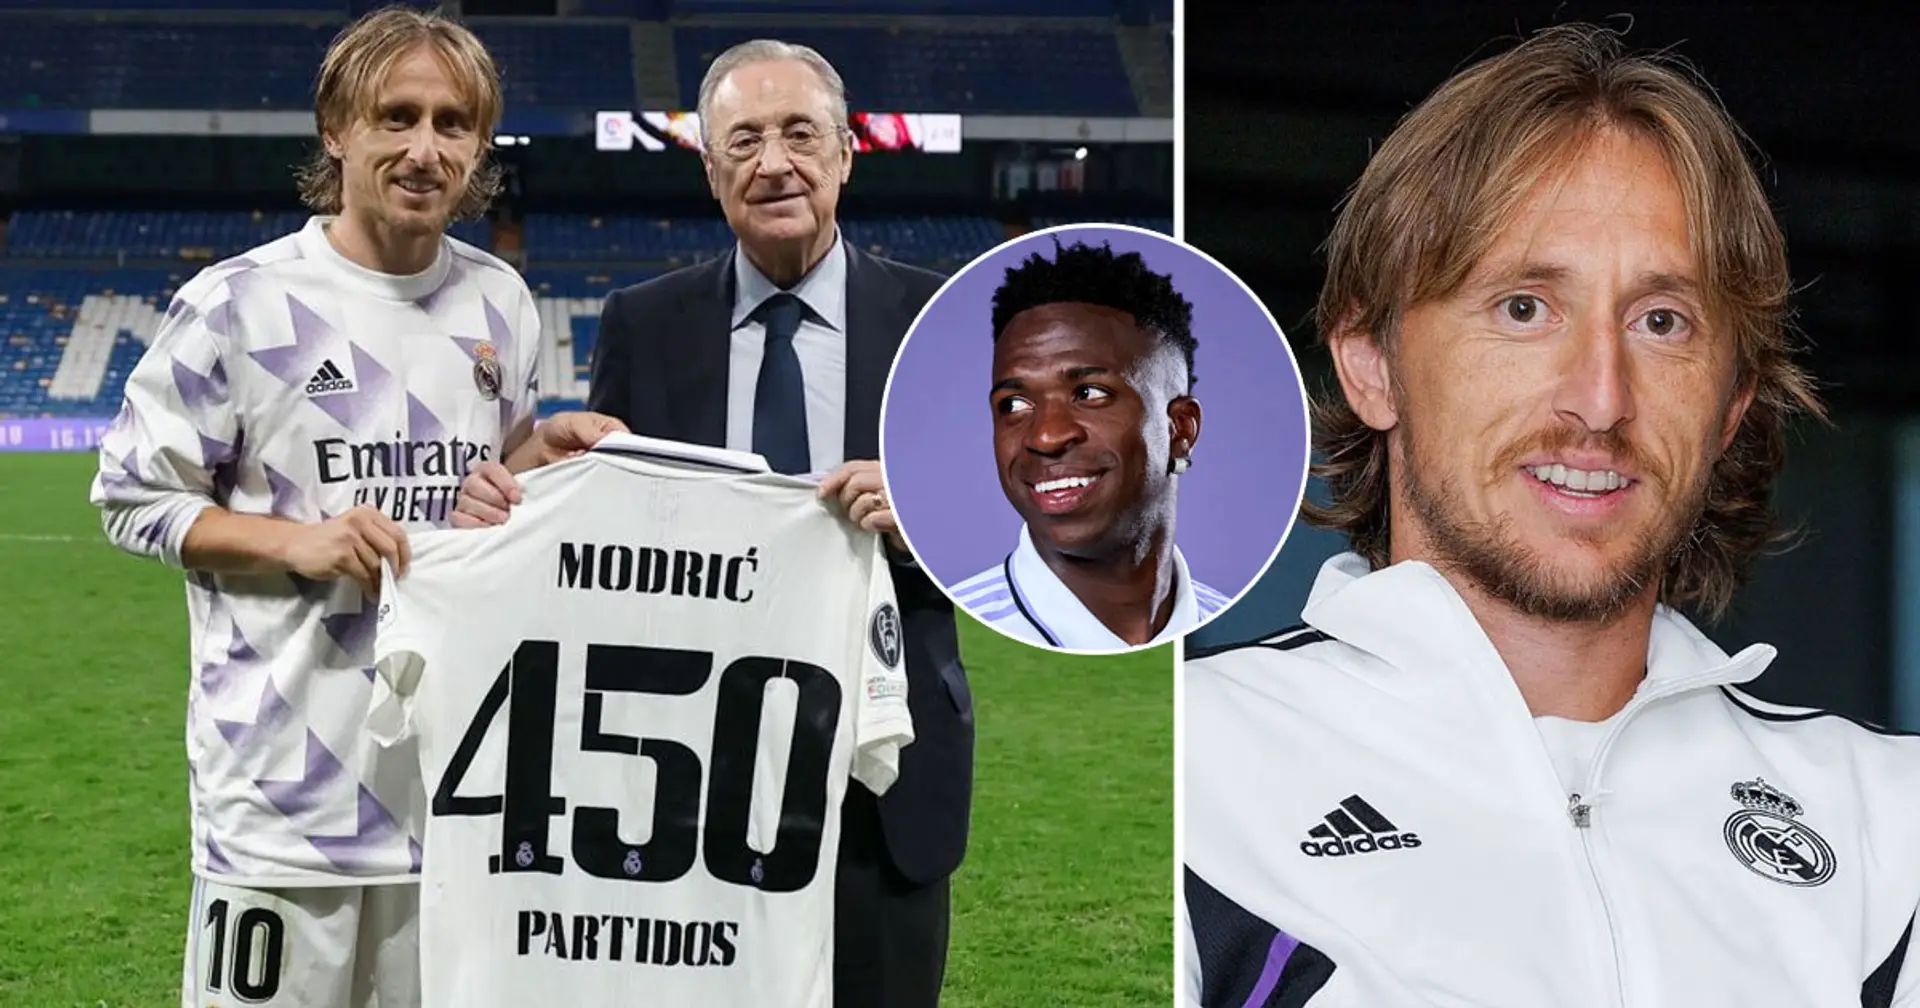 Modric reacts to 450th Real Madrid appearance, thanks Vini for one thing